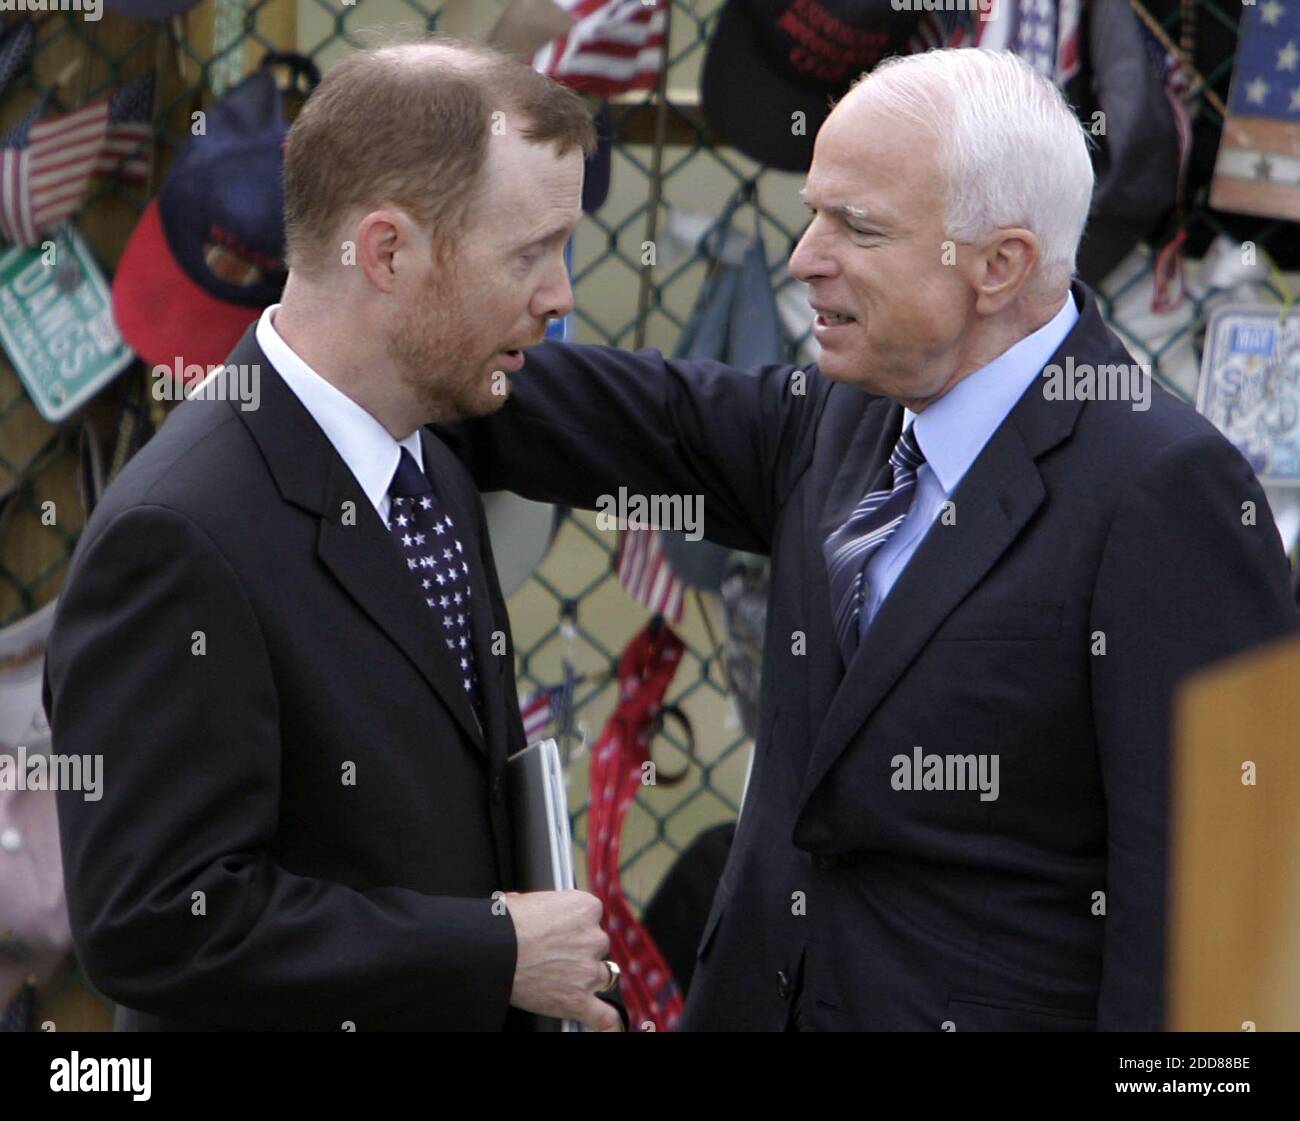 NO FILM, NO VIDEO, NO TV, NO DOCUMENTARY - Republican presidential candidate John McCain, right, talks with Gordon Felt whose brother, Ed Felt, was among those killed on Flight 93 during a ceremony in Shanksville, Pennsylvania, honoring those killed on September 2001, on Thursday September. 11, 2008. Photo by Laurence Kesterson/MCT/ABACAPRESS.COM Stock Photo